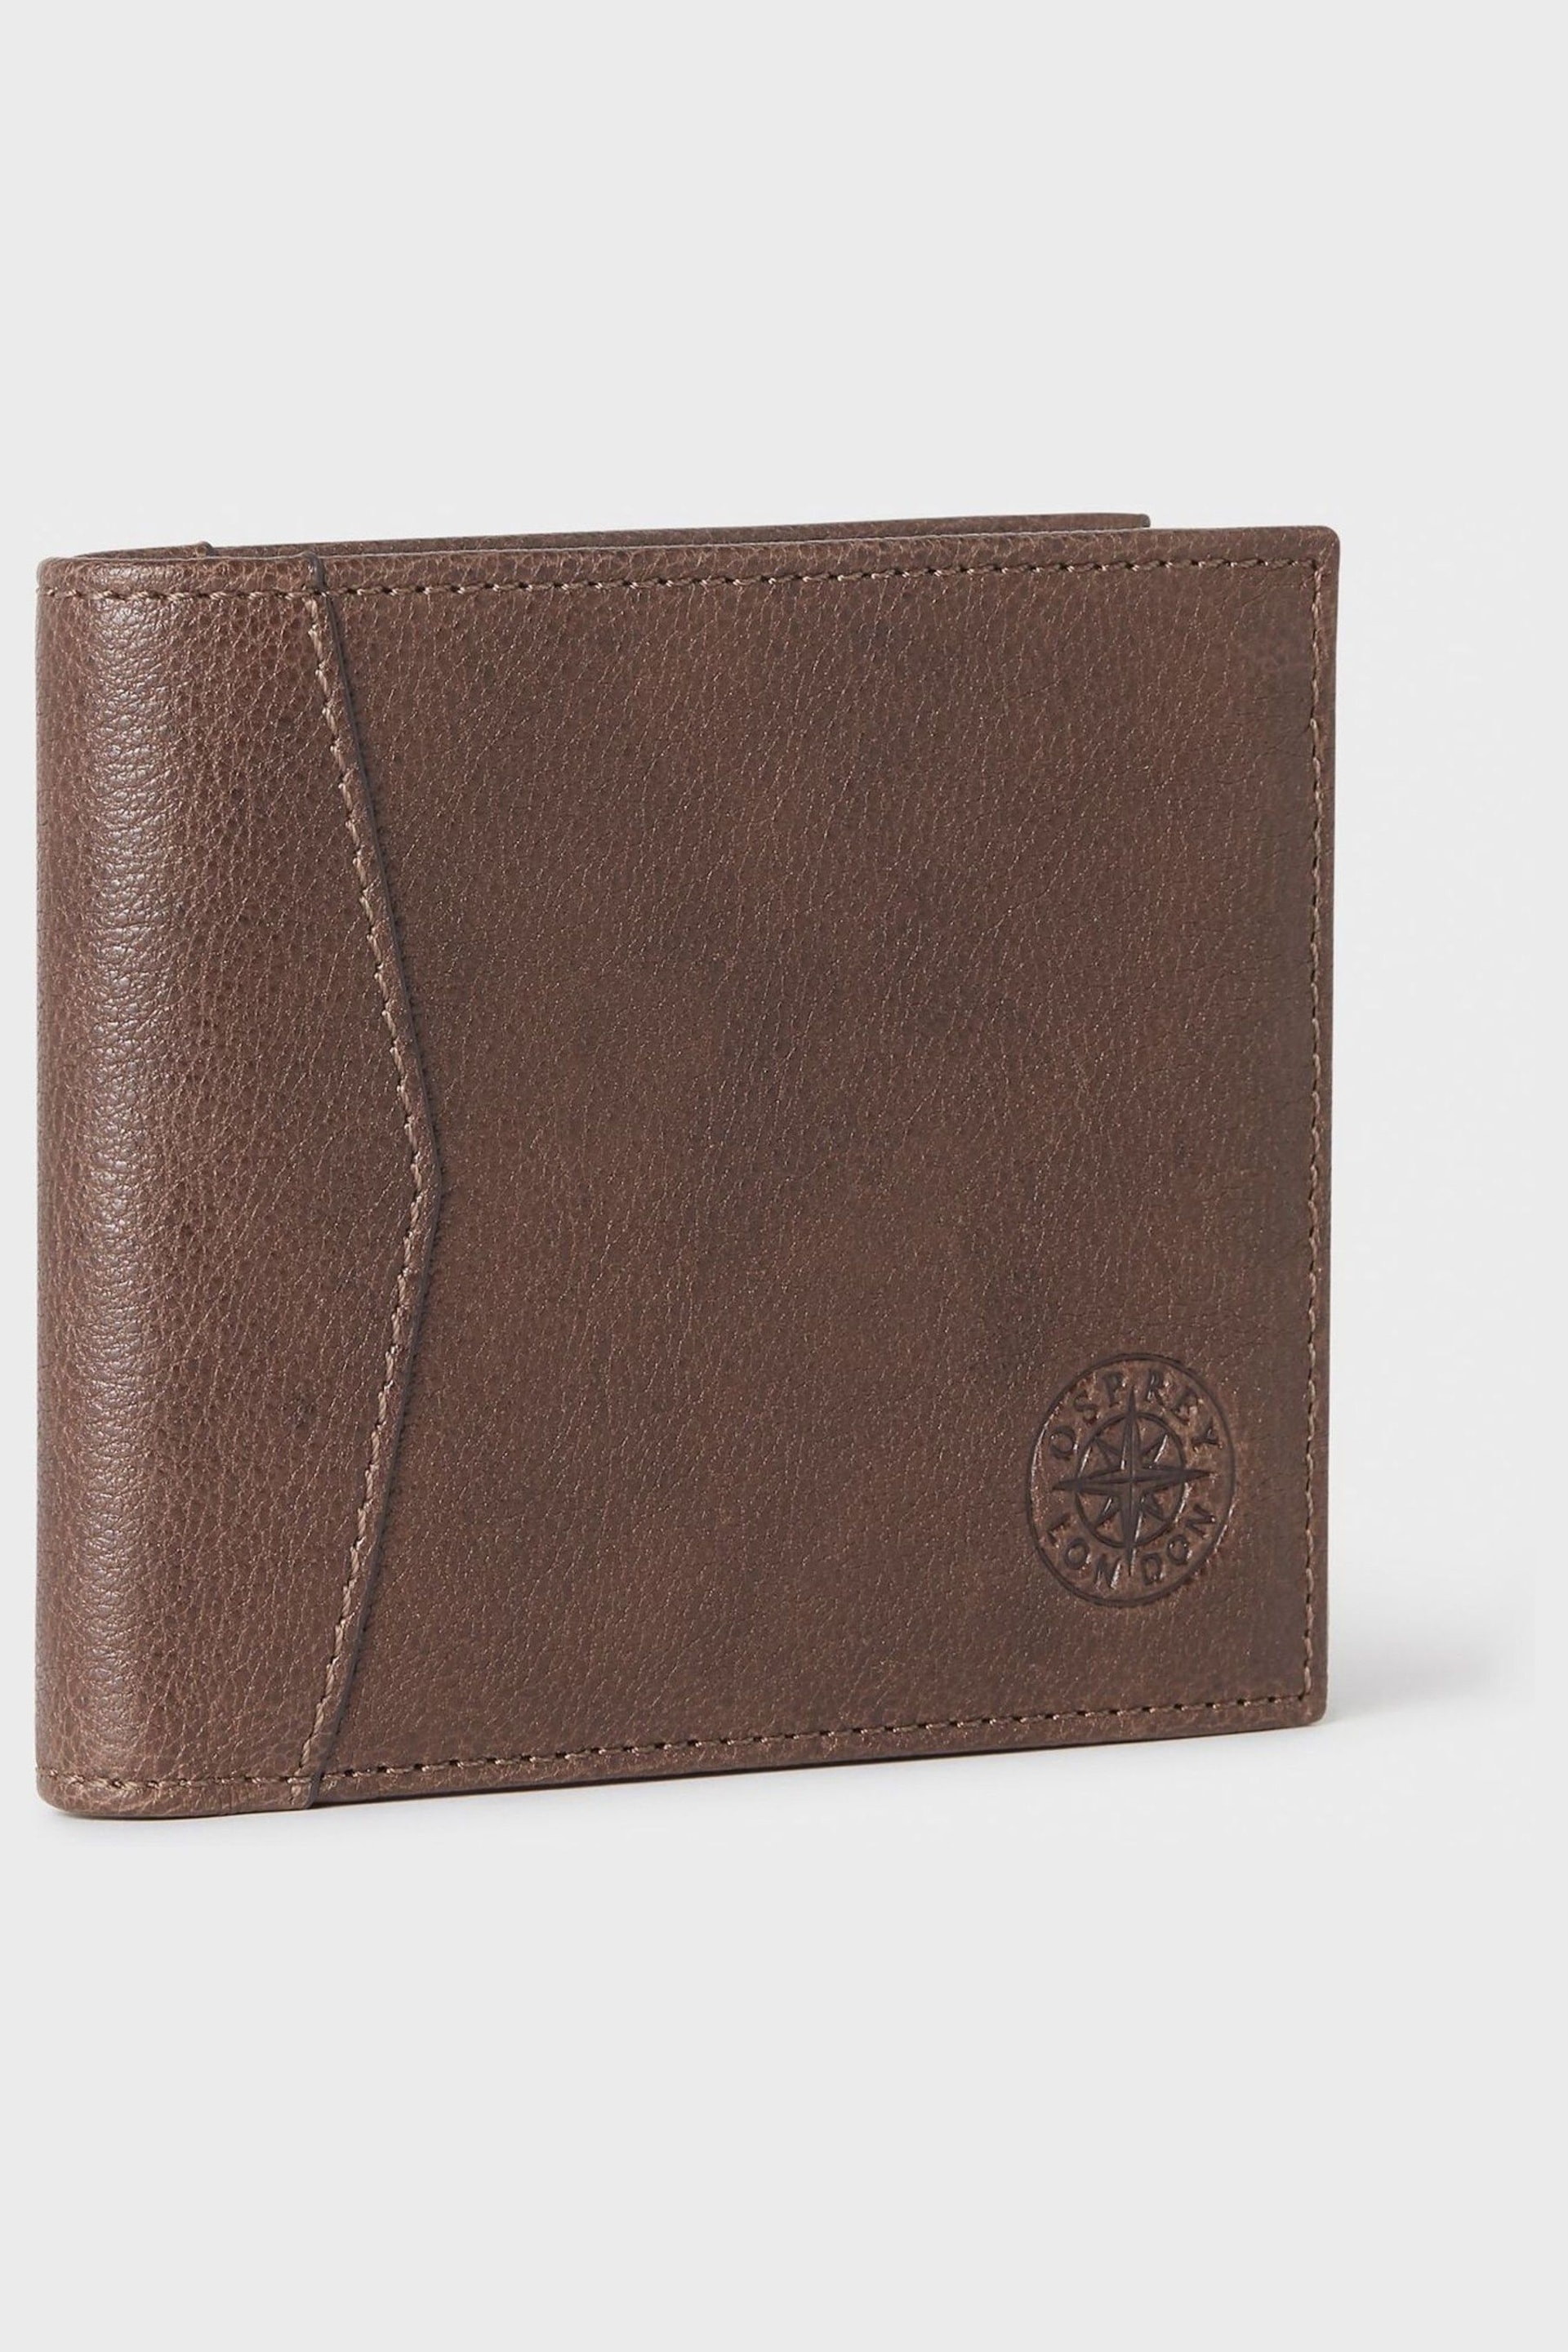 Osprey London The Compass Leather Card Brown Wallet - Image 3 of 5